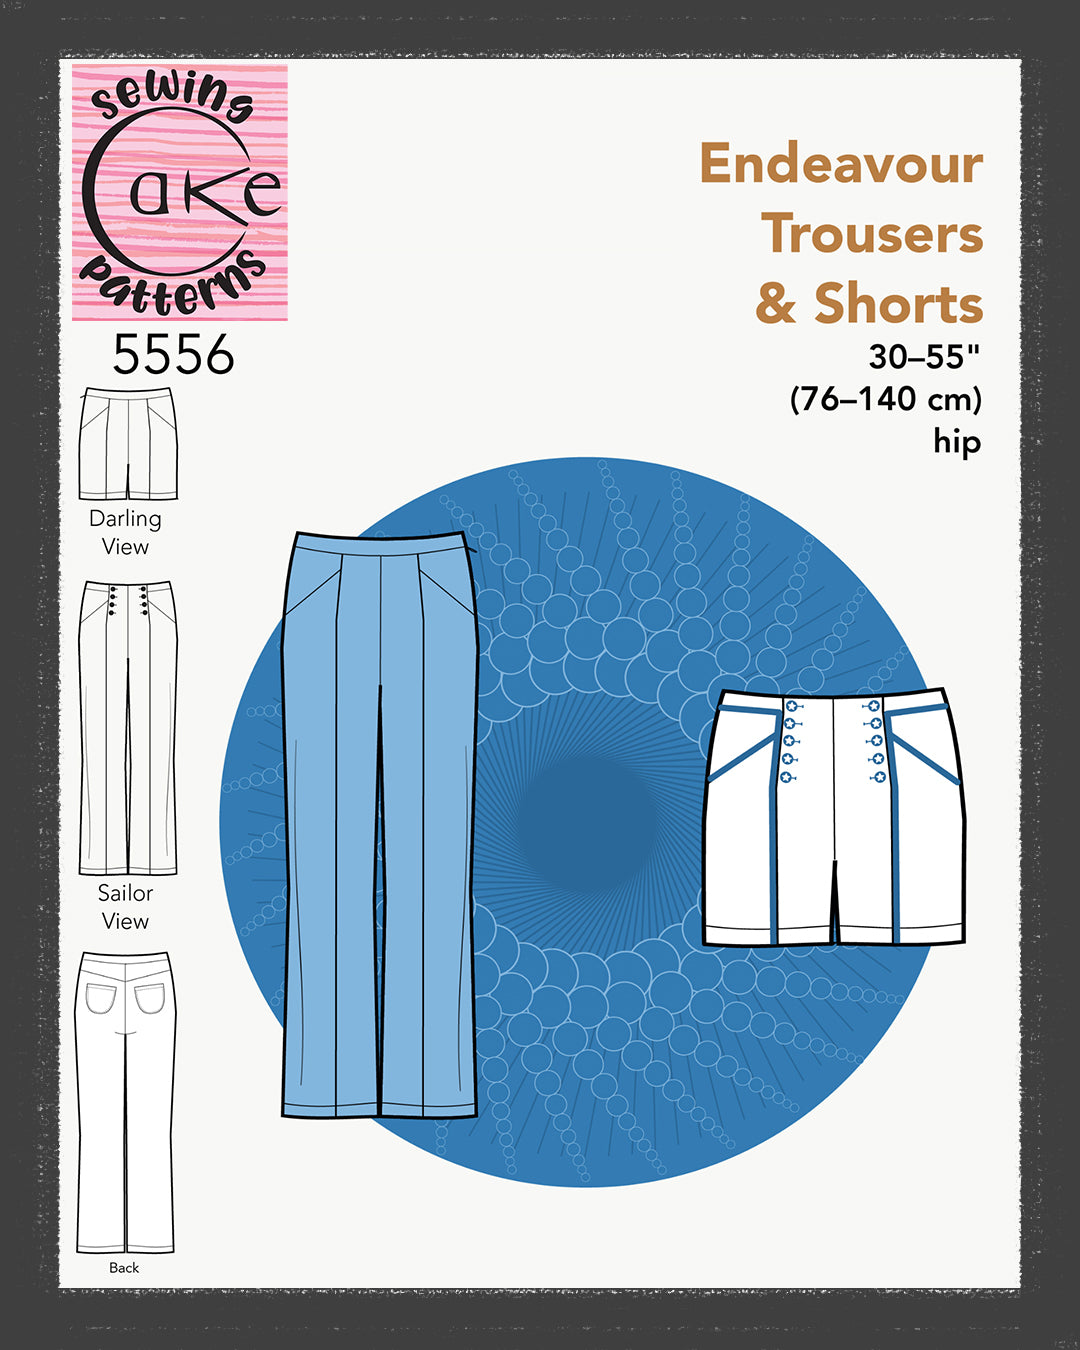 SEWING CAKE 5556 - ENDEAVOUR TROUSERS AND SHORTS (PRINTED)